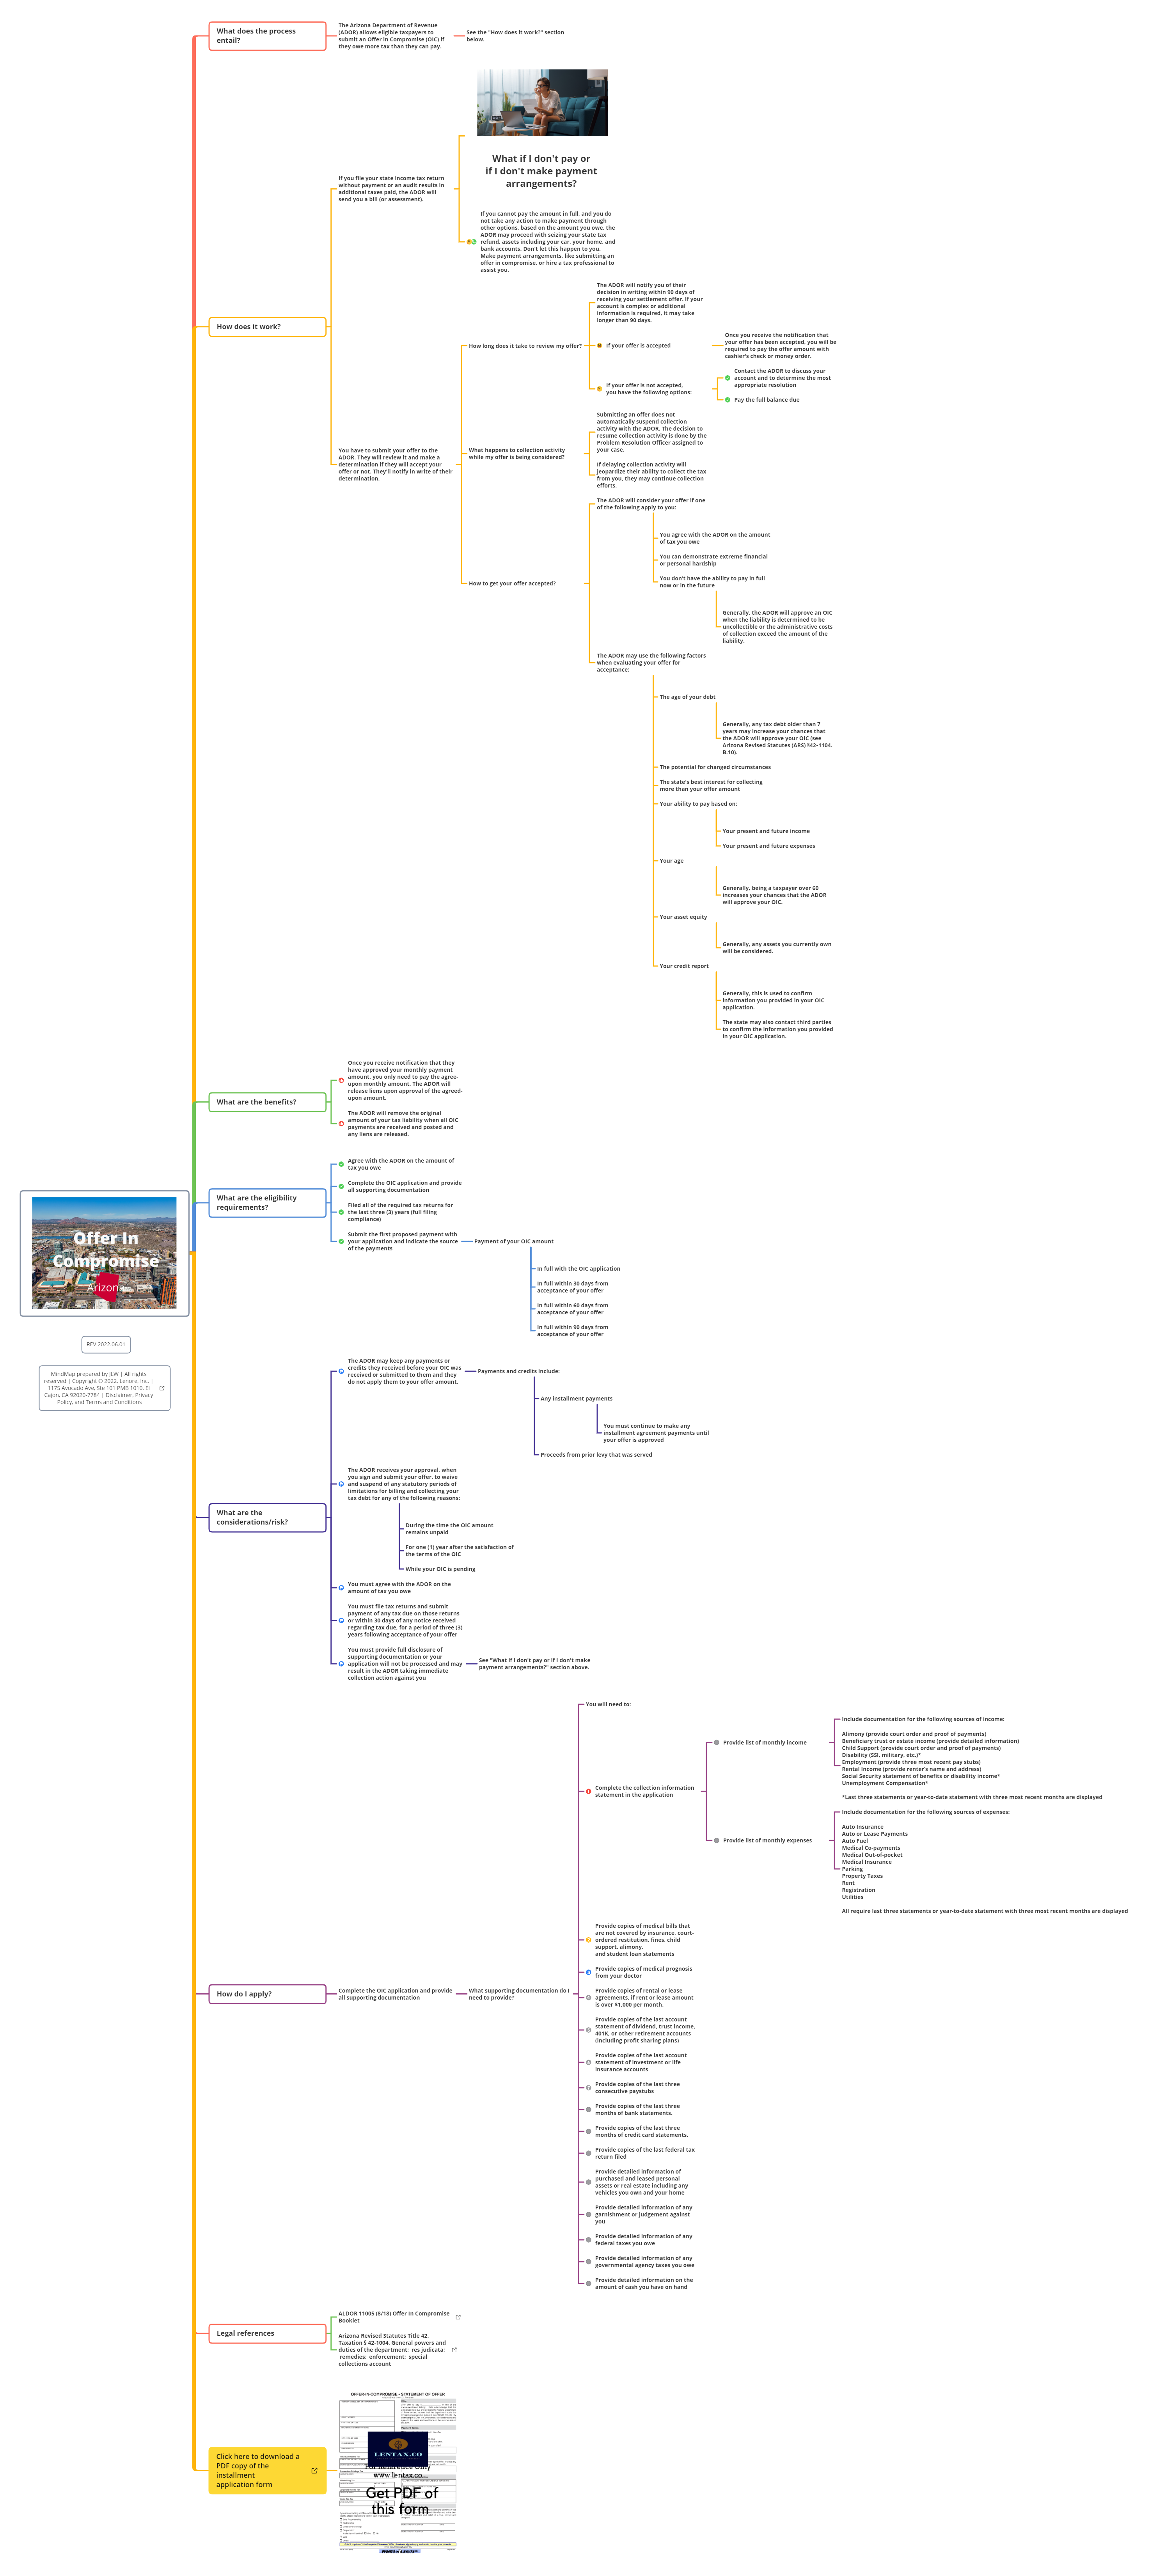 Offer In Compromise_Arizona_MindMap_expanded